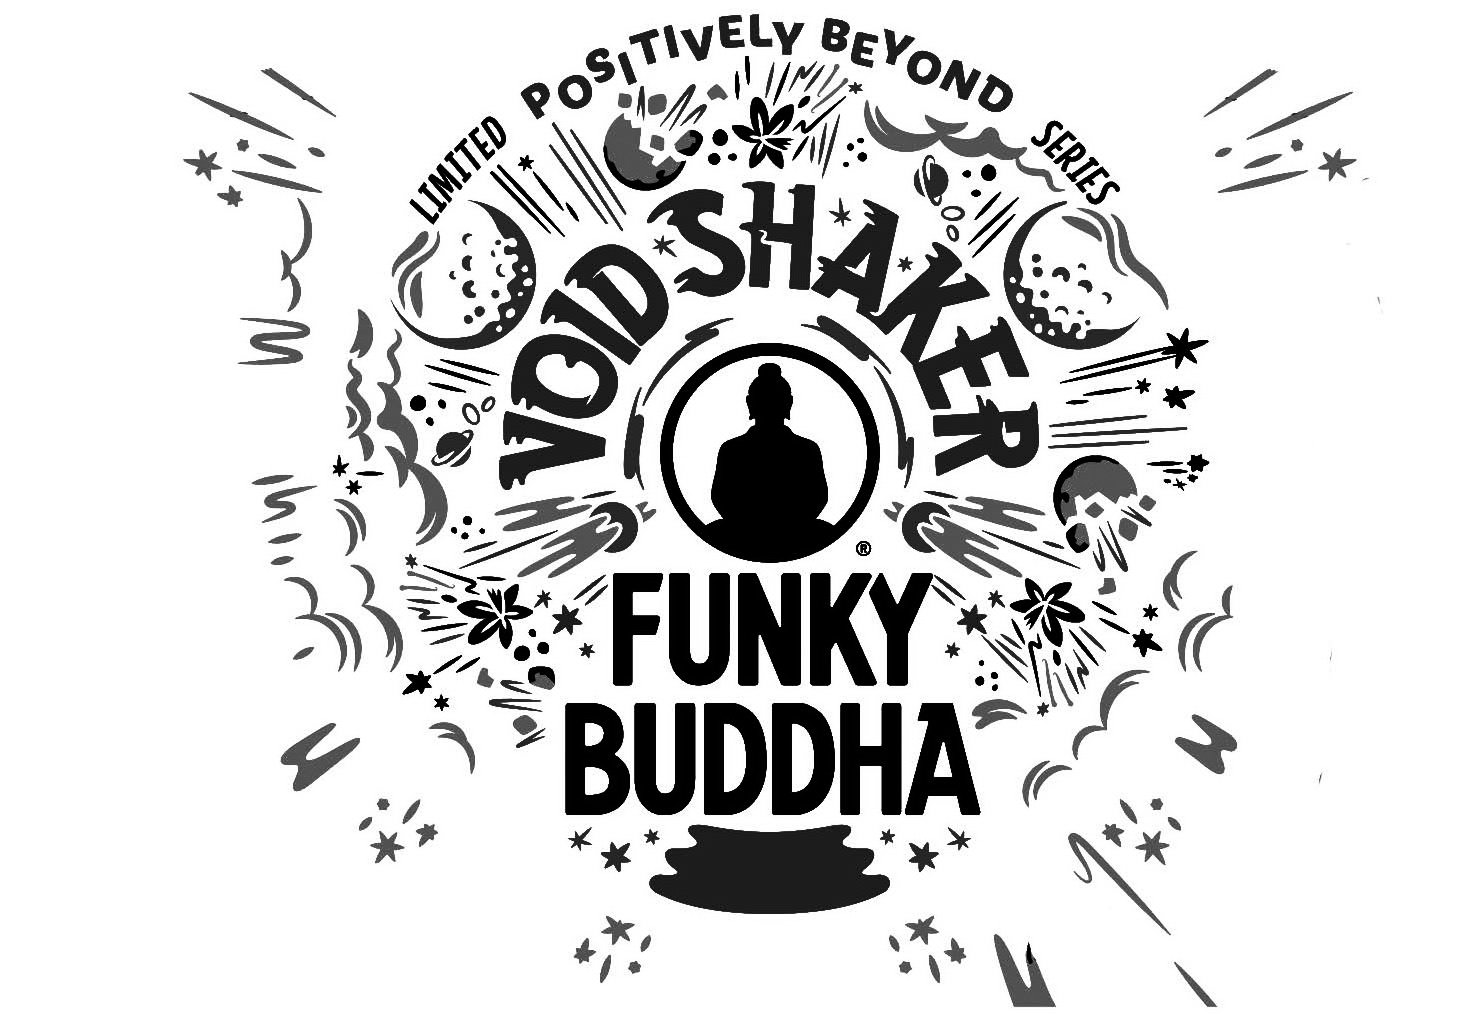  POSITIVELY BEYOND LIMITED SERIES VOID SHAKER FUNKY BUDDHA